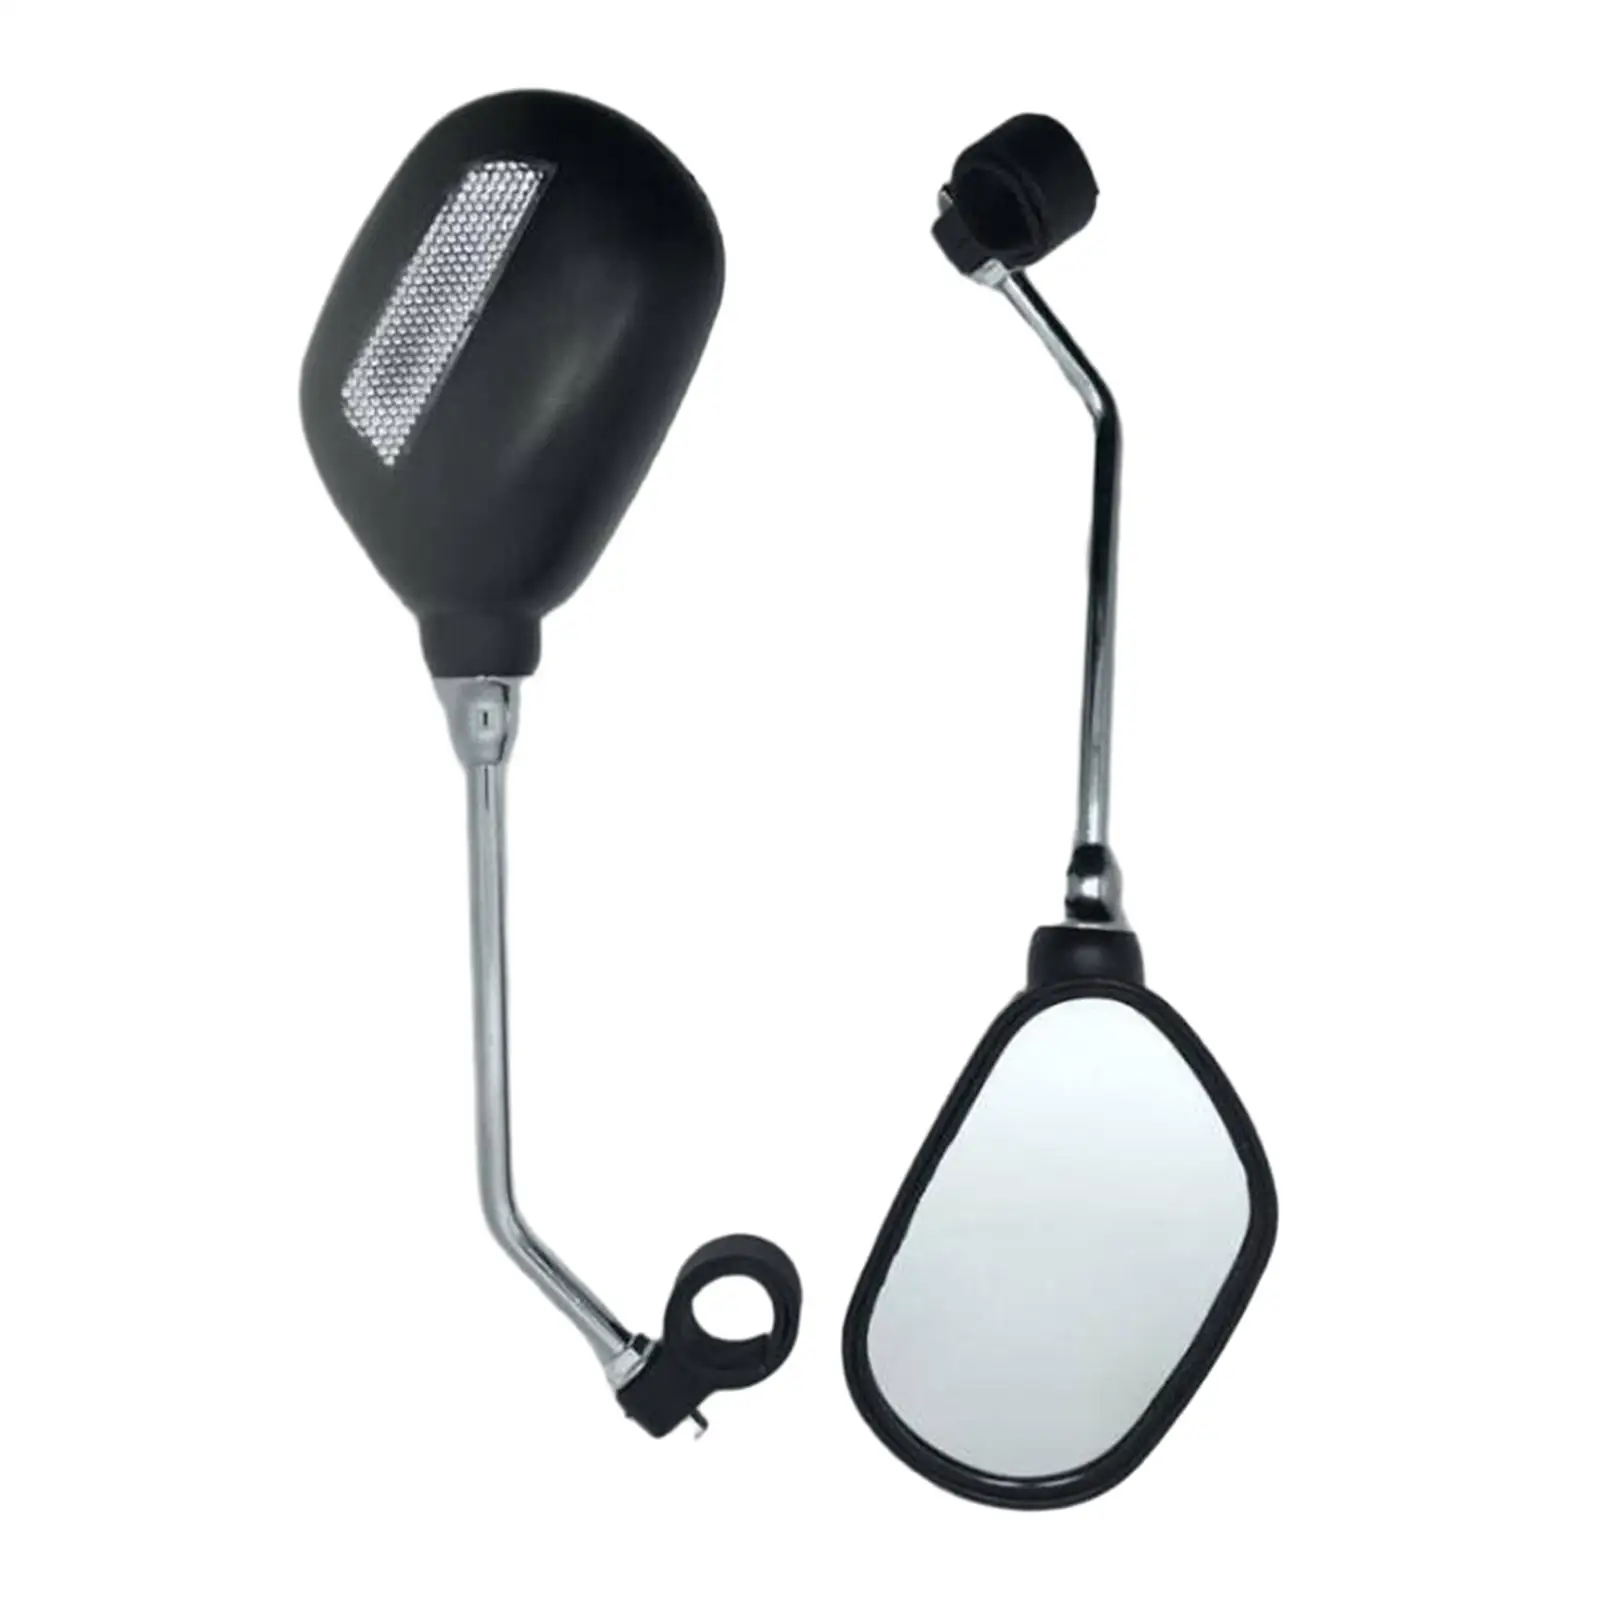 Bike Mirror, Bicycle Rear View Mirror for Handlebars, Safety Mirror for Motorbike, Mountain Road Bike